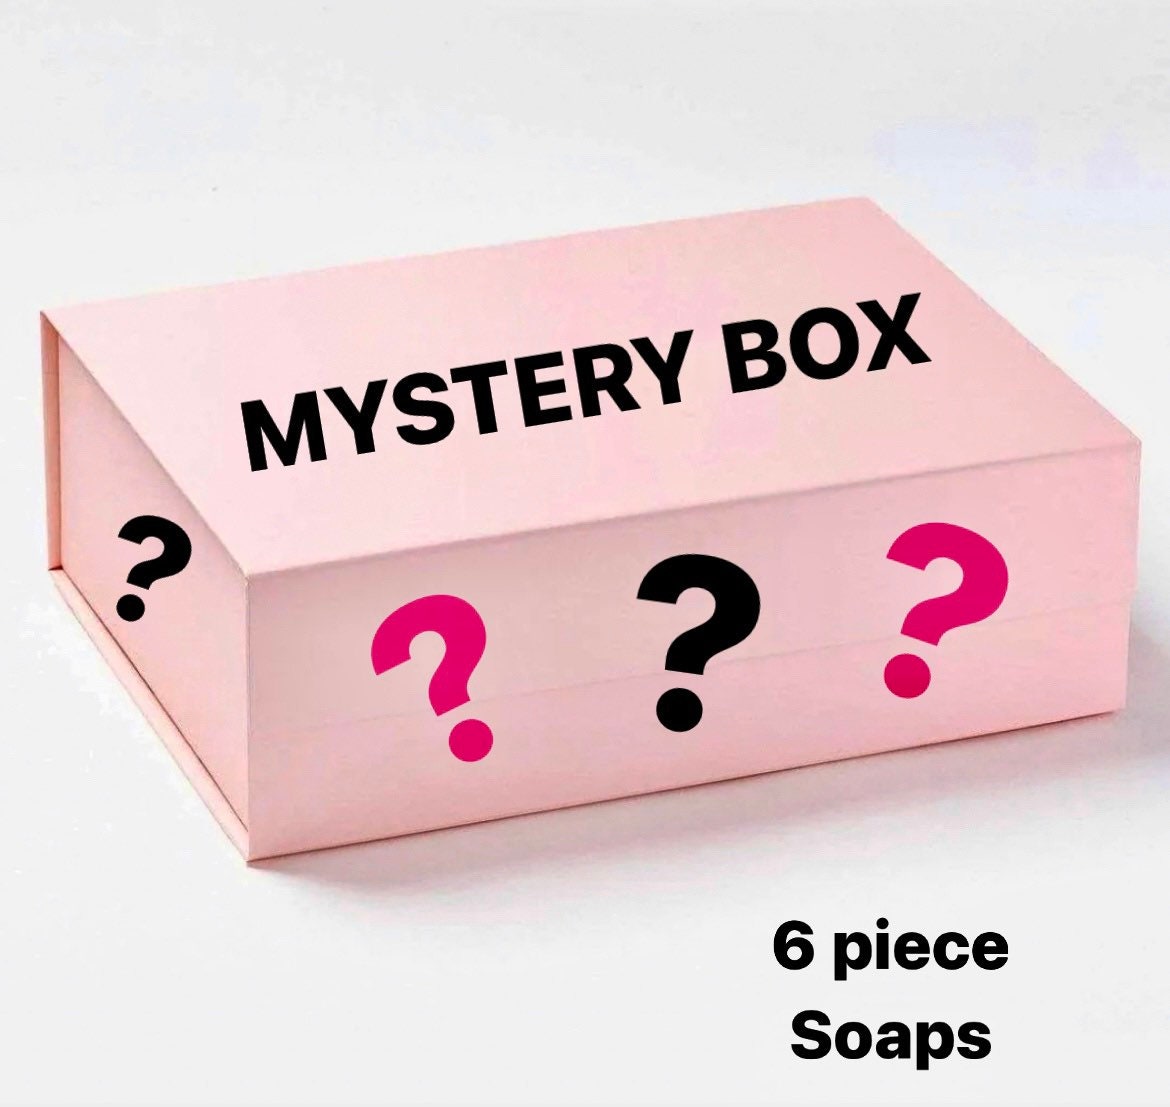 Money Soap - You Pick the $ Size of the Surprise!